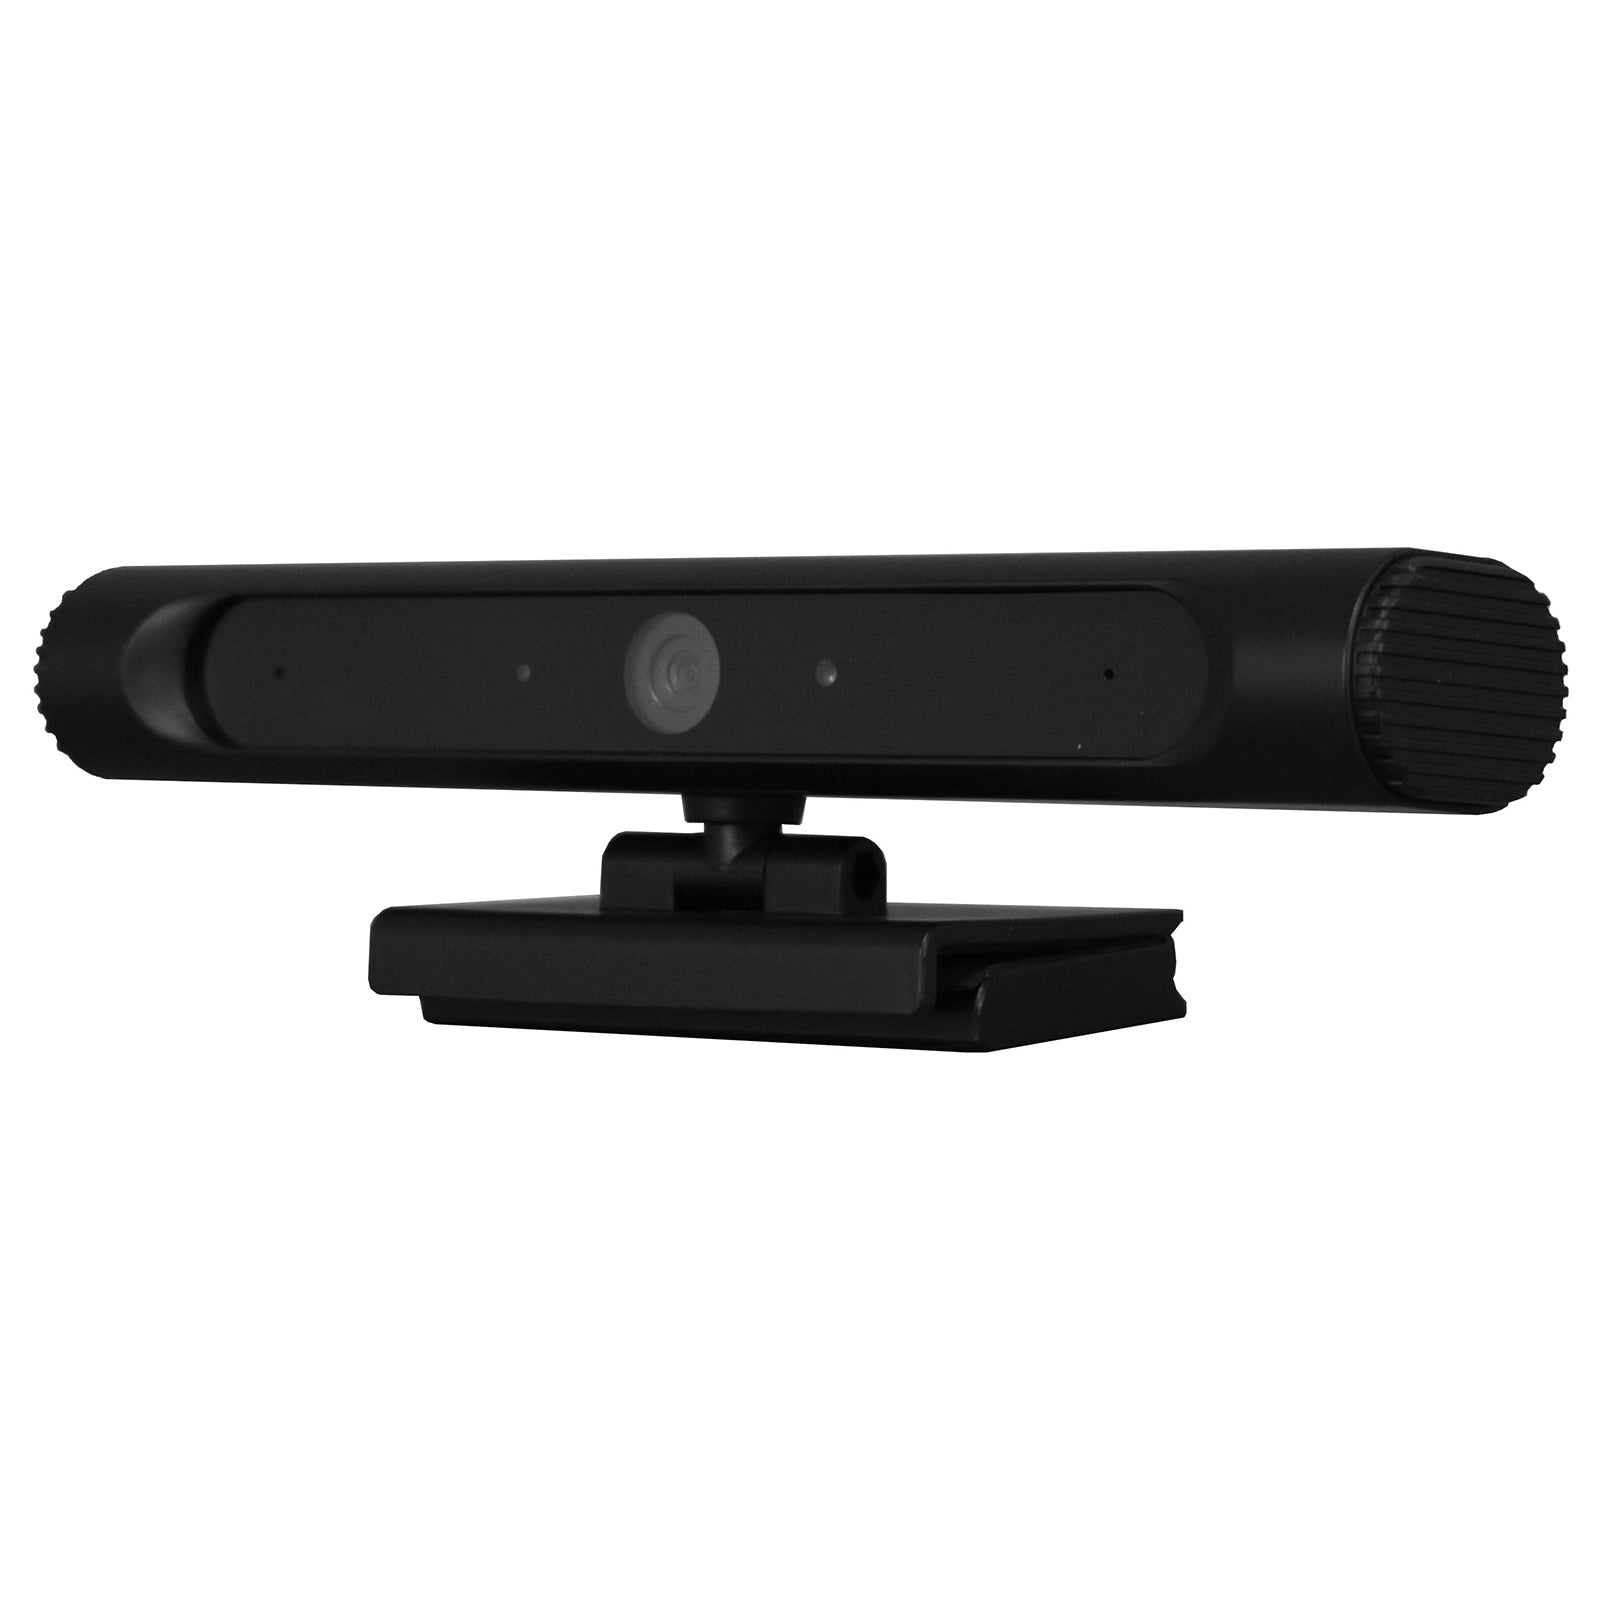 C60 2M Pixels Webcam HD Webcam with Microphone Work with Streaming Computer  Camera for Online Classes Video Conference Calling Gaming